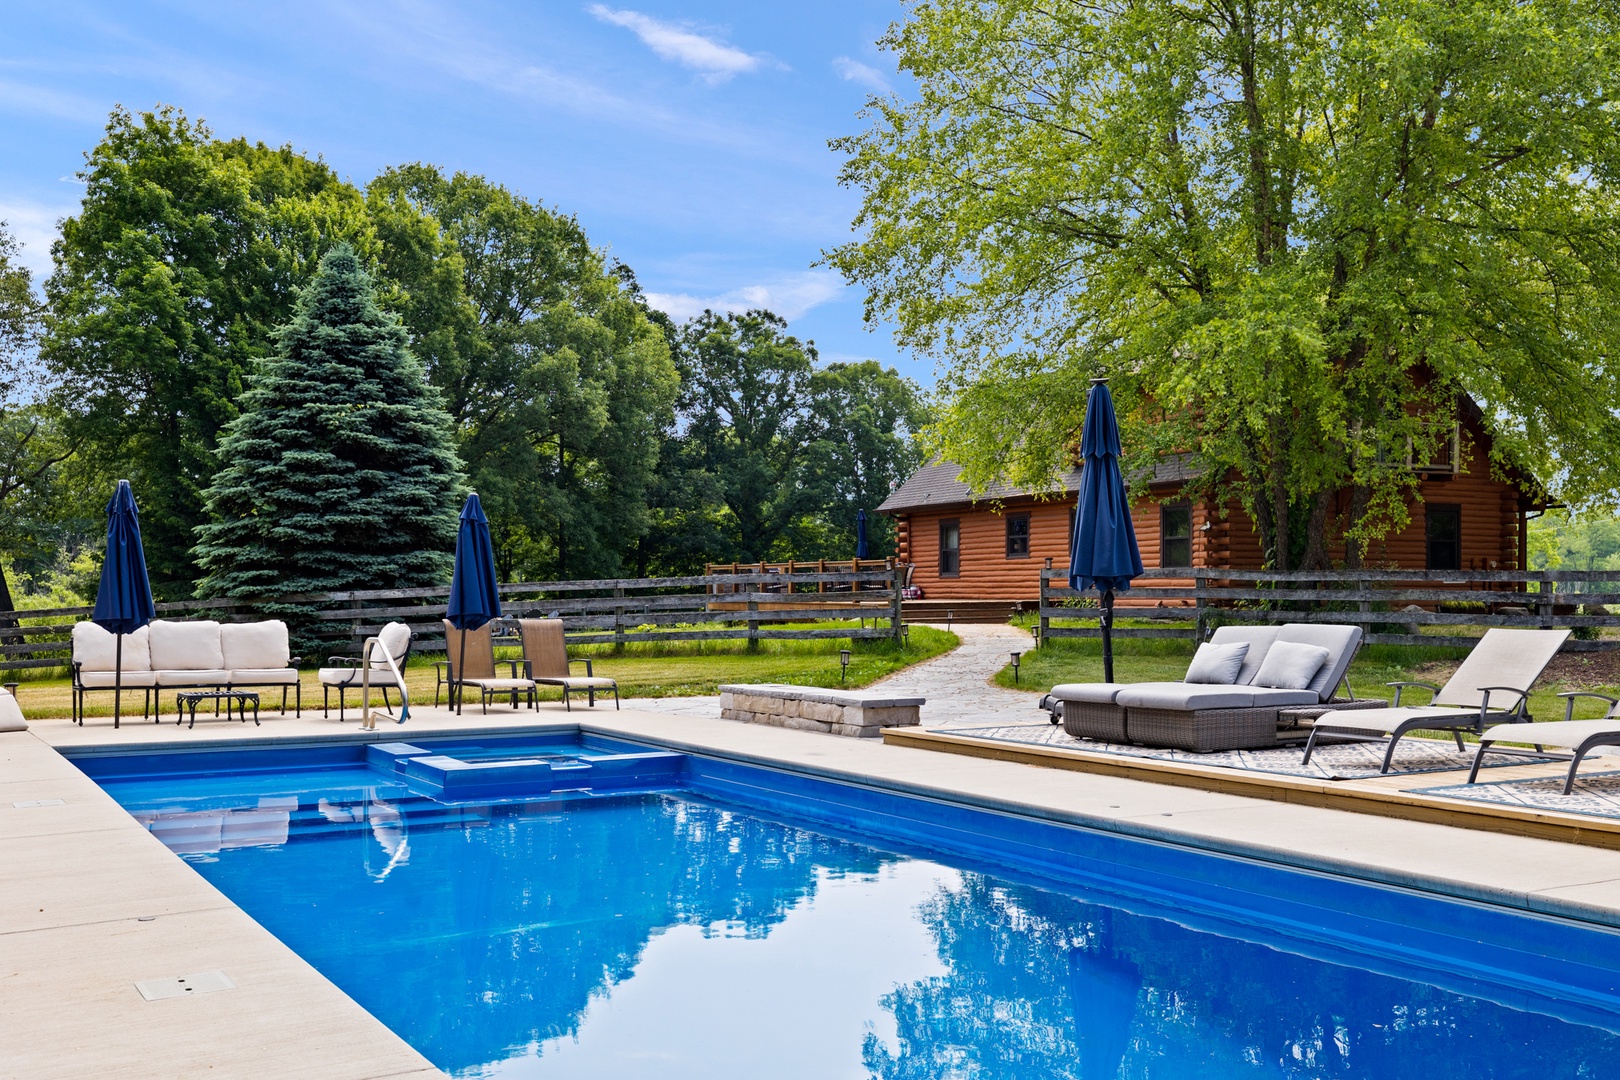 Take a refreshing dip in the swimming pool, surrounded by the serene beauty of the natural landscape.